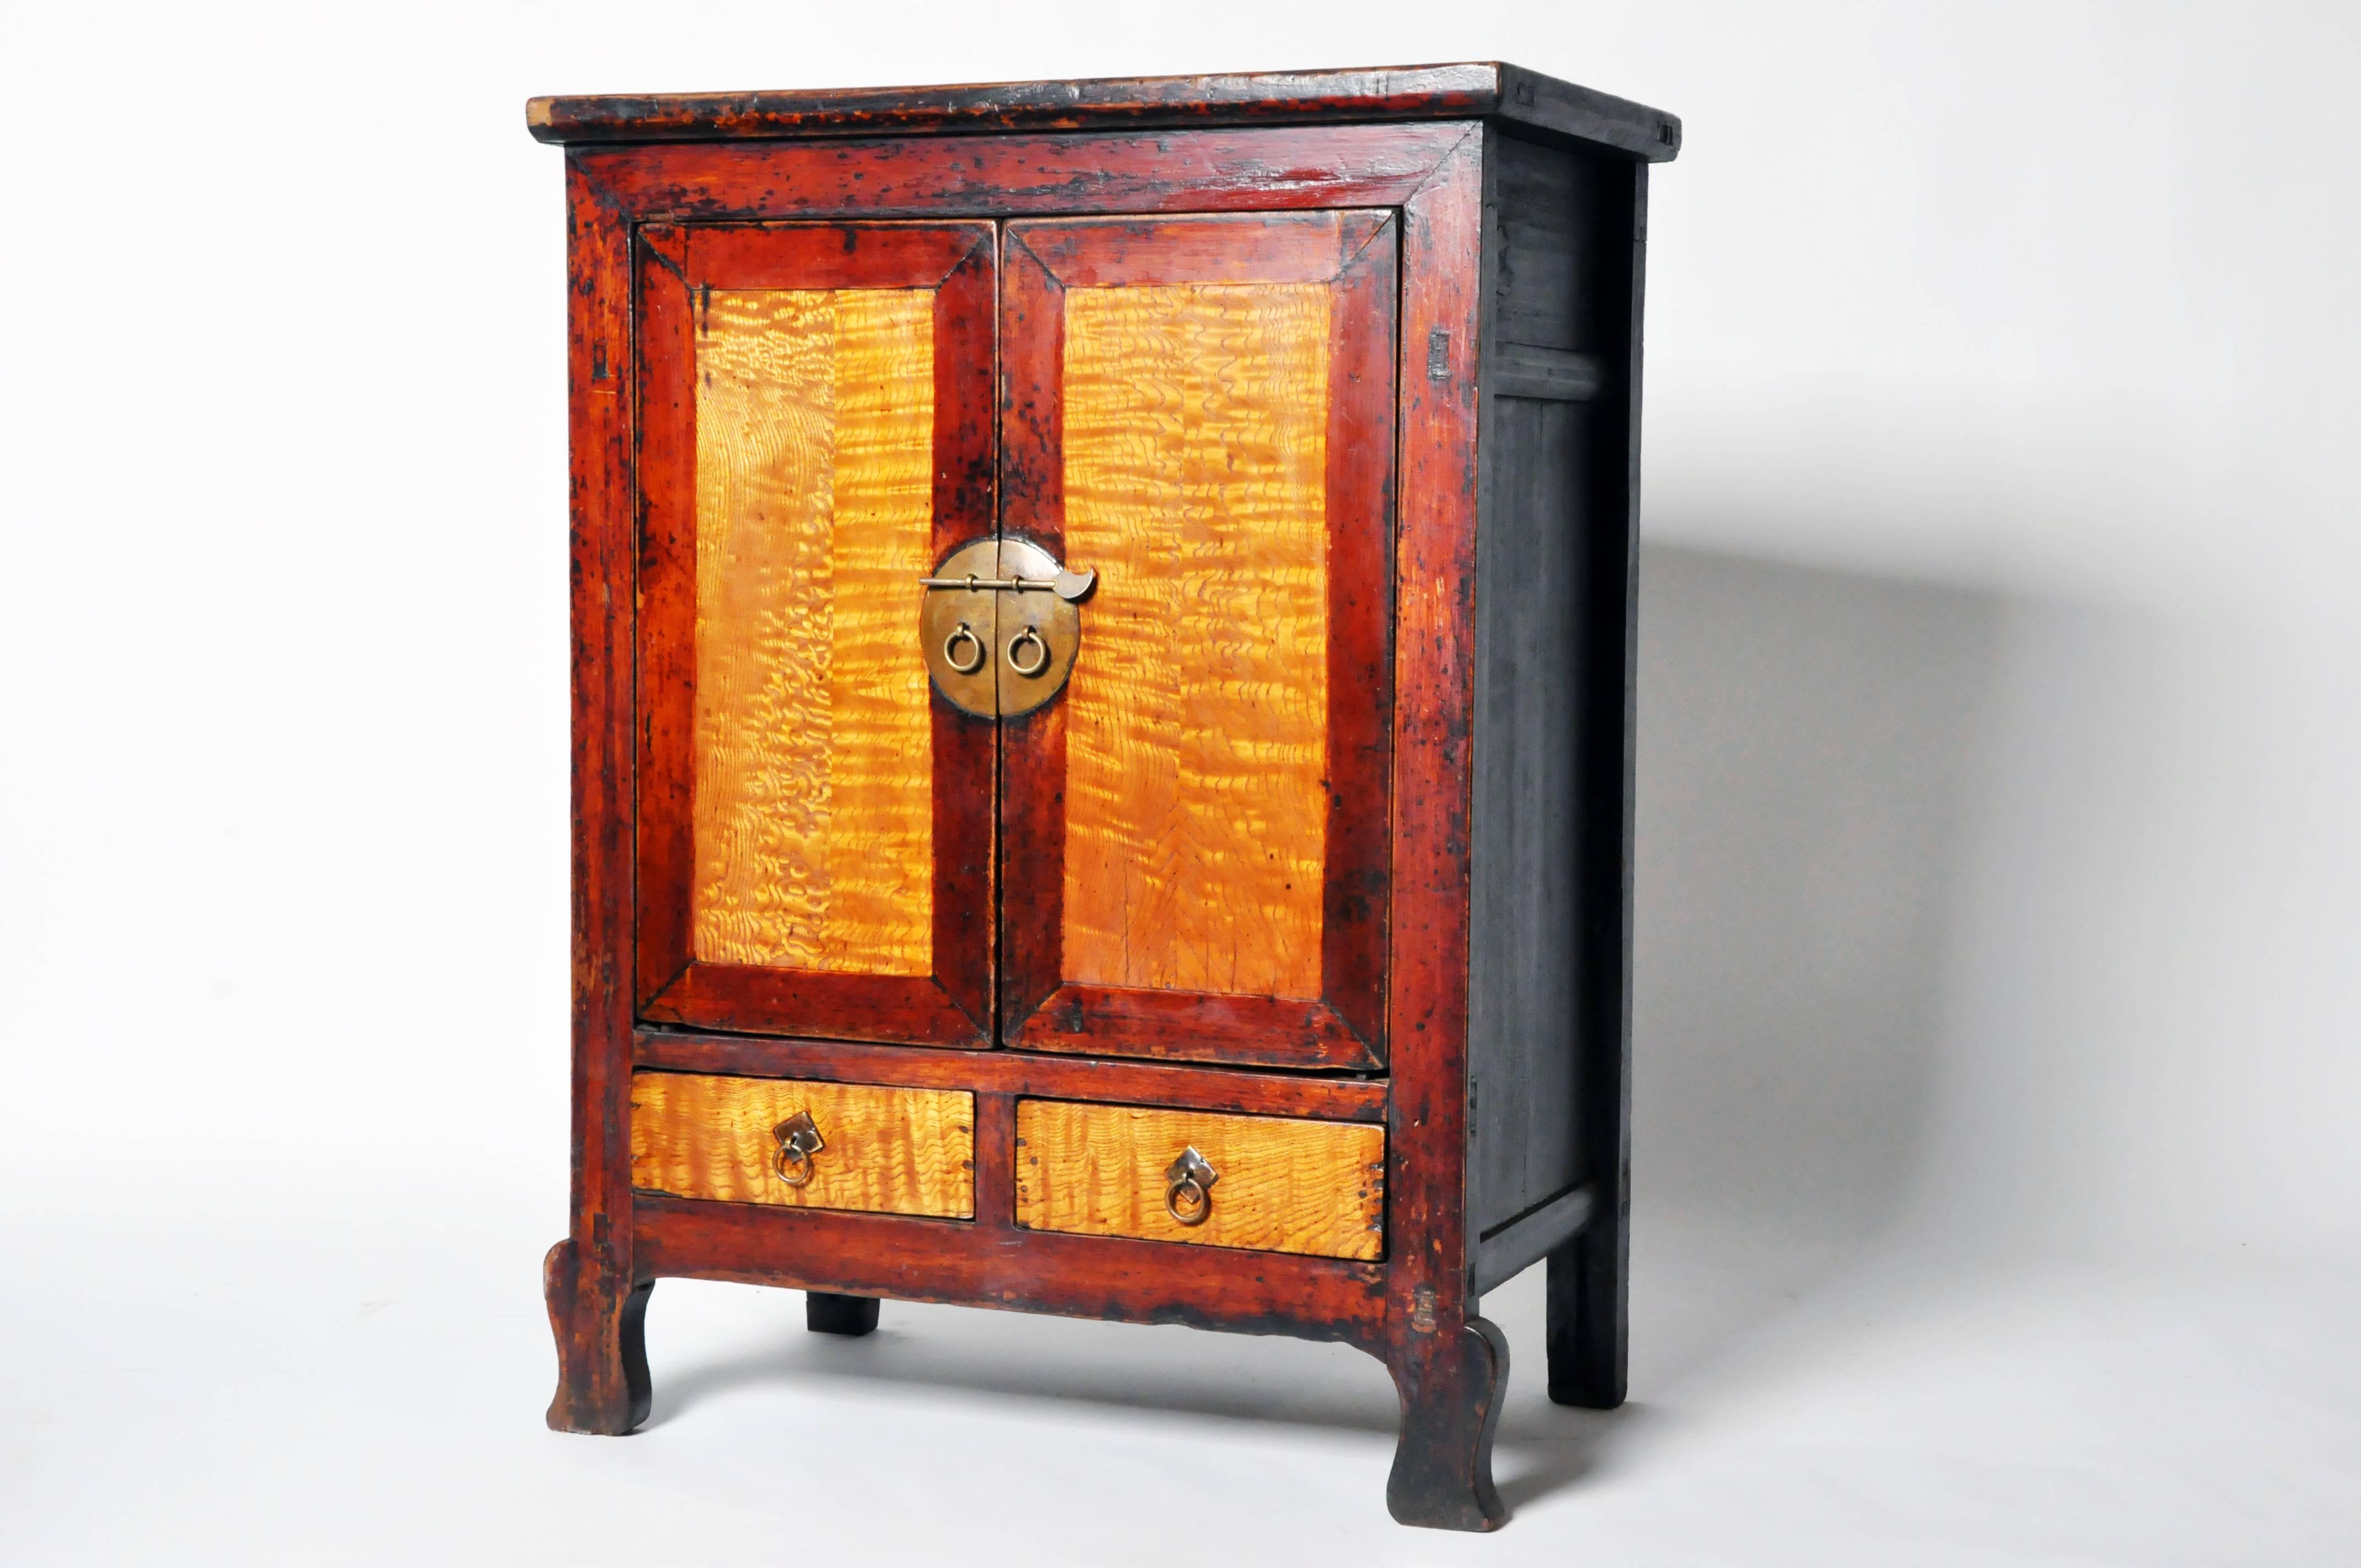 The paneled door inserts and drawer fronts feature dramatically contrasting wood grain and moon-form escutcheon with ring pulls. Handsome lines continue throughout this storage chest right down to the shapely front cabriole legs.